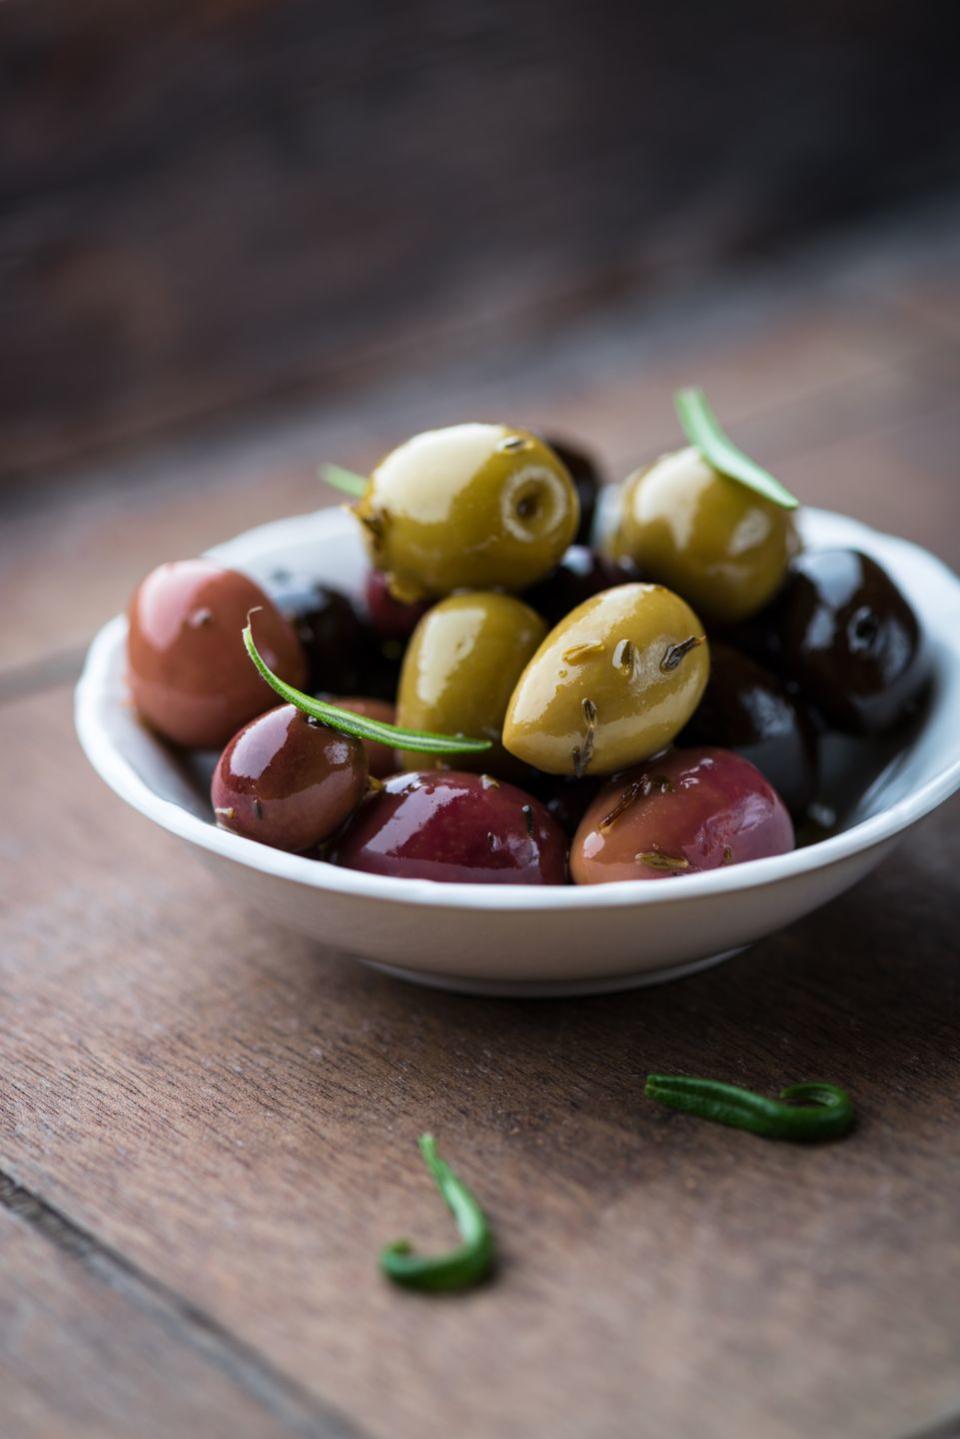 Olives and Olive Oil